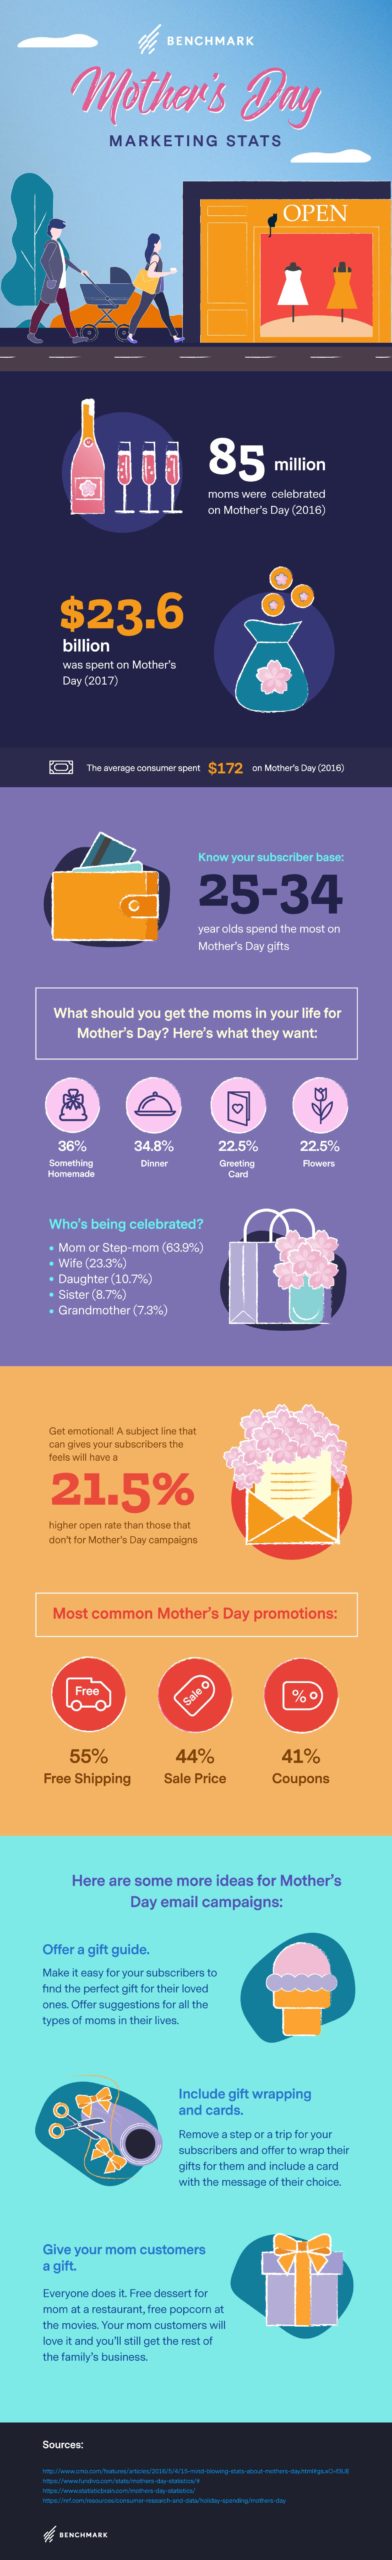 Mother’s Day Email Marketing Tips & Infographic